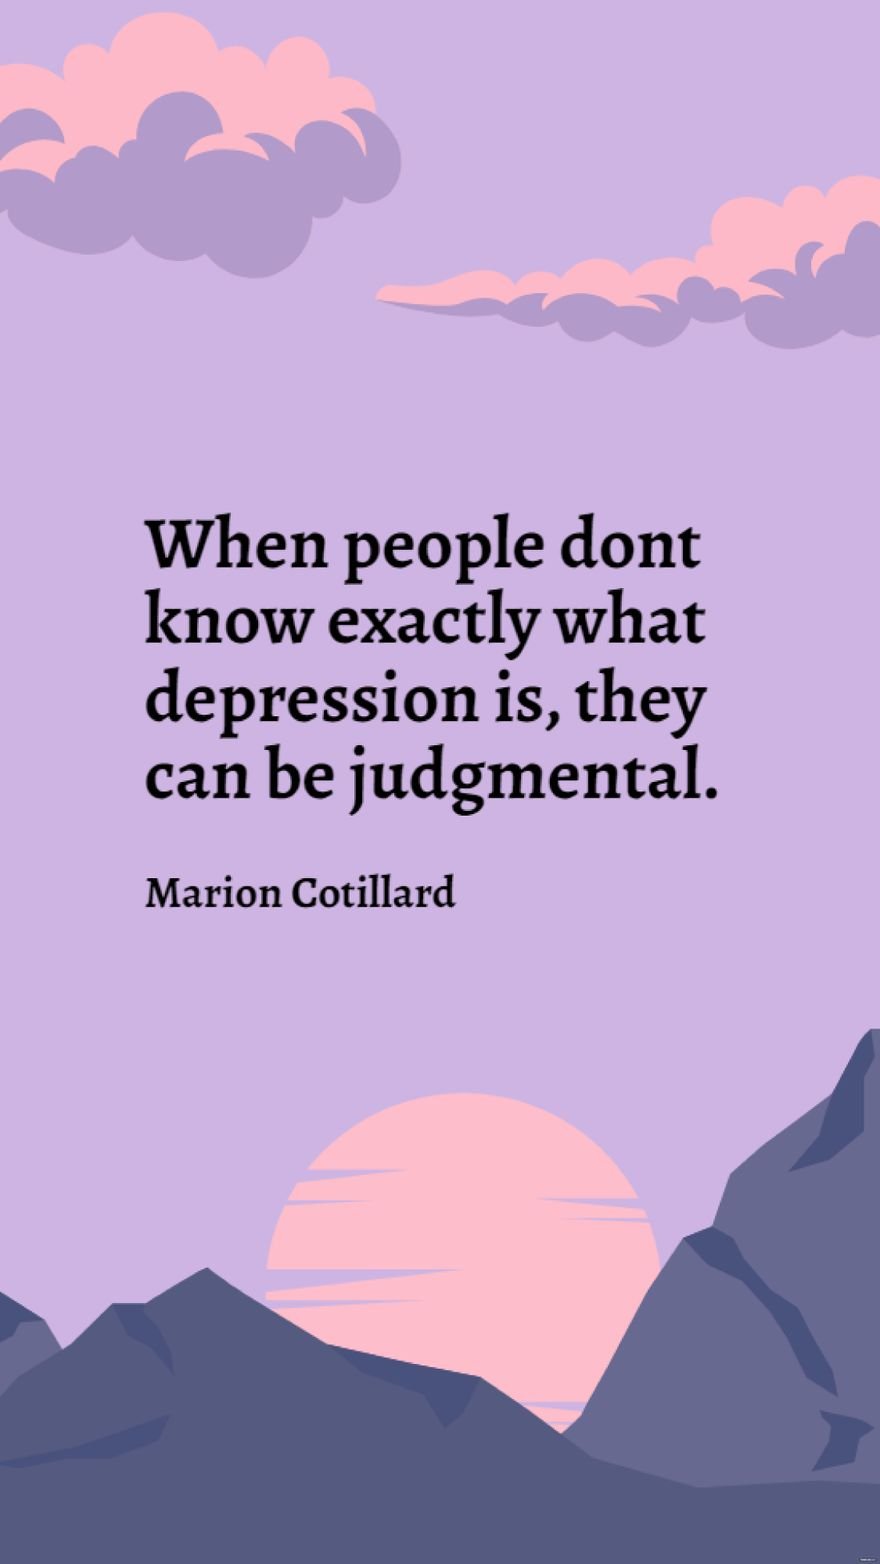 Marion Cotillard - When people dont know exactly what depression is, they can be judgmental.